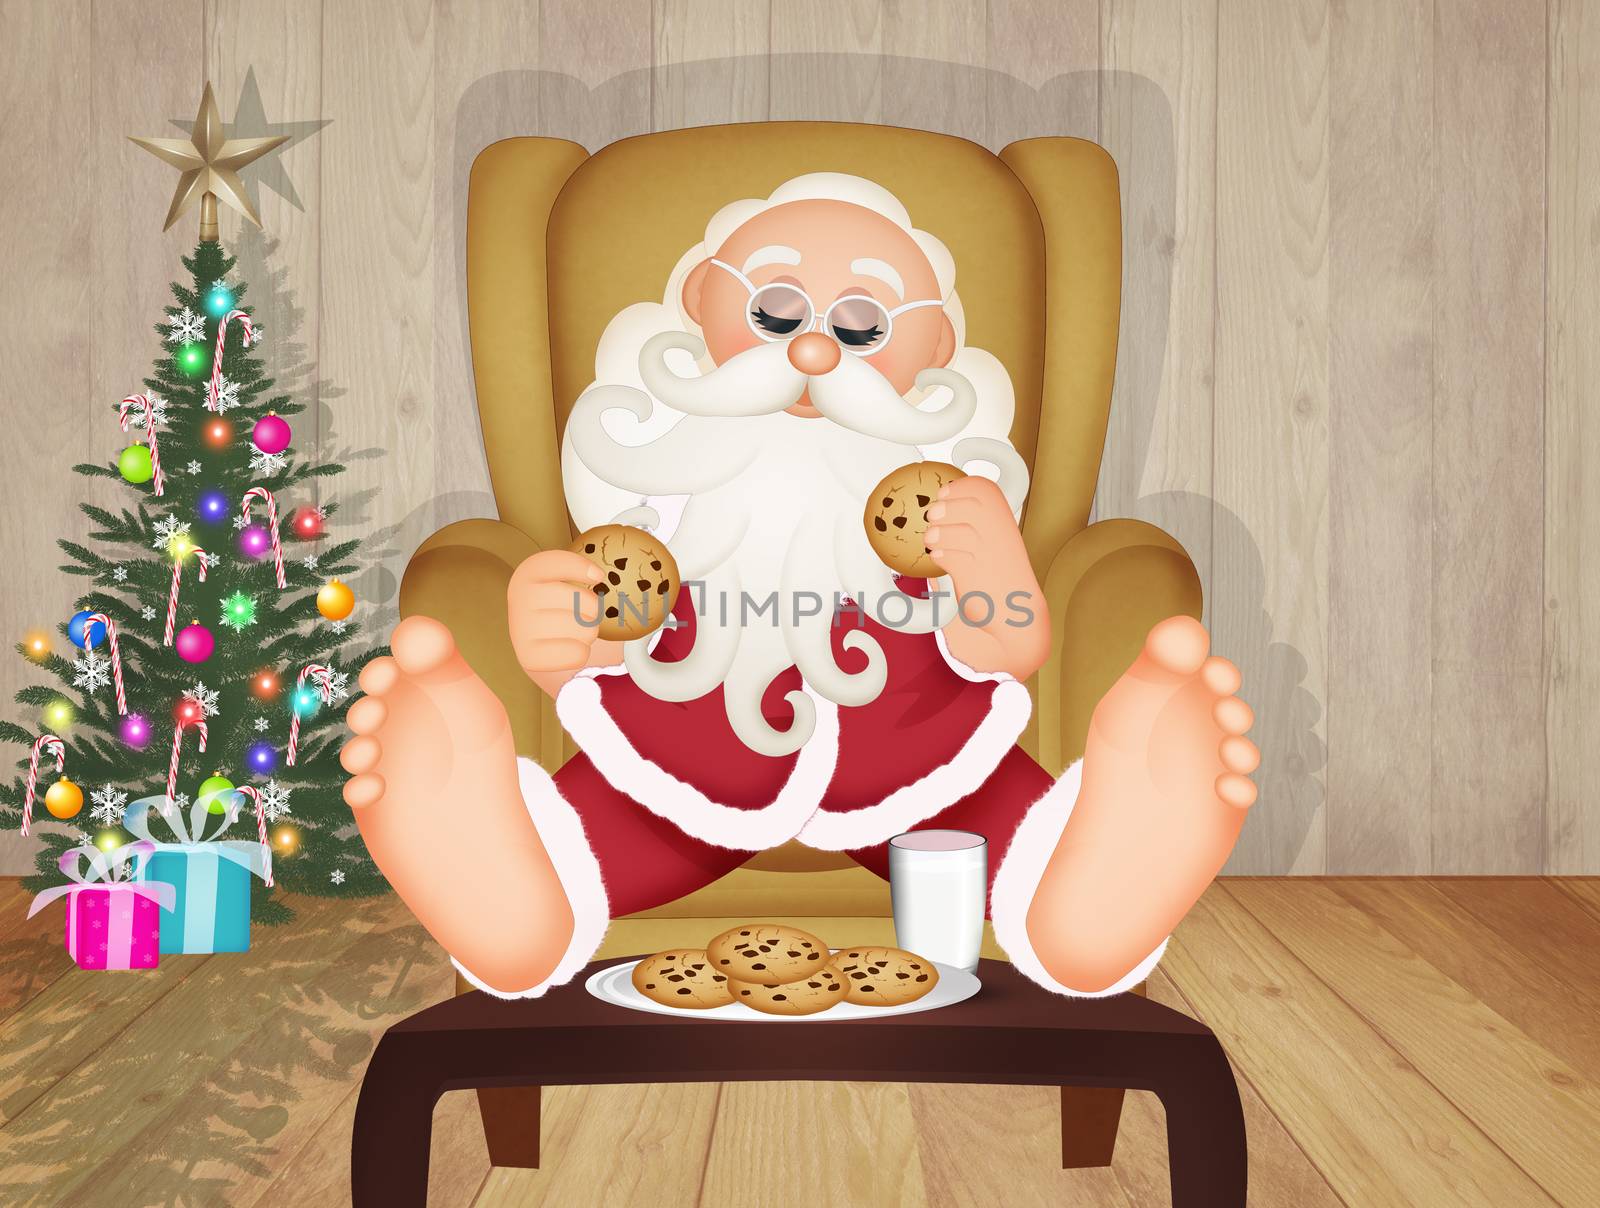 illustration of Santa Claus with milk and cookies